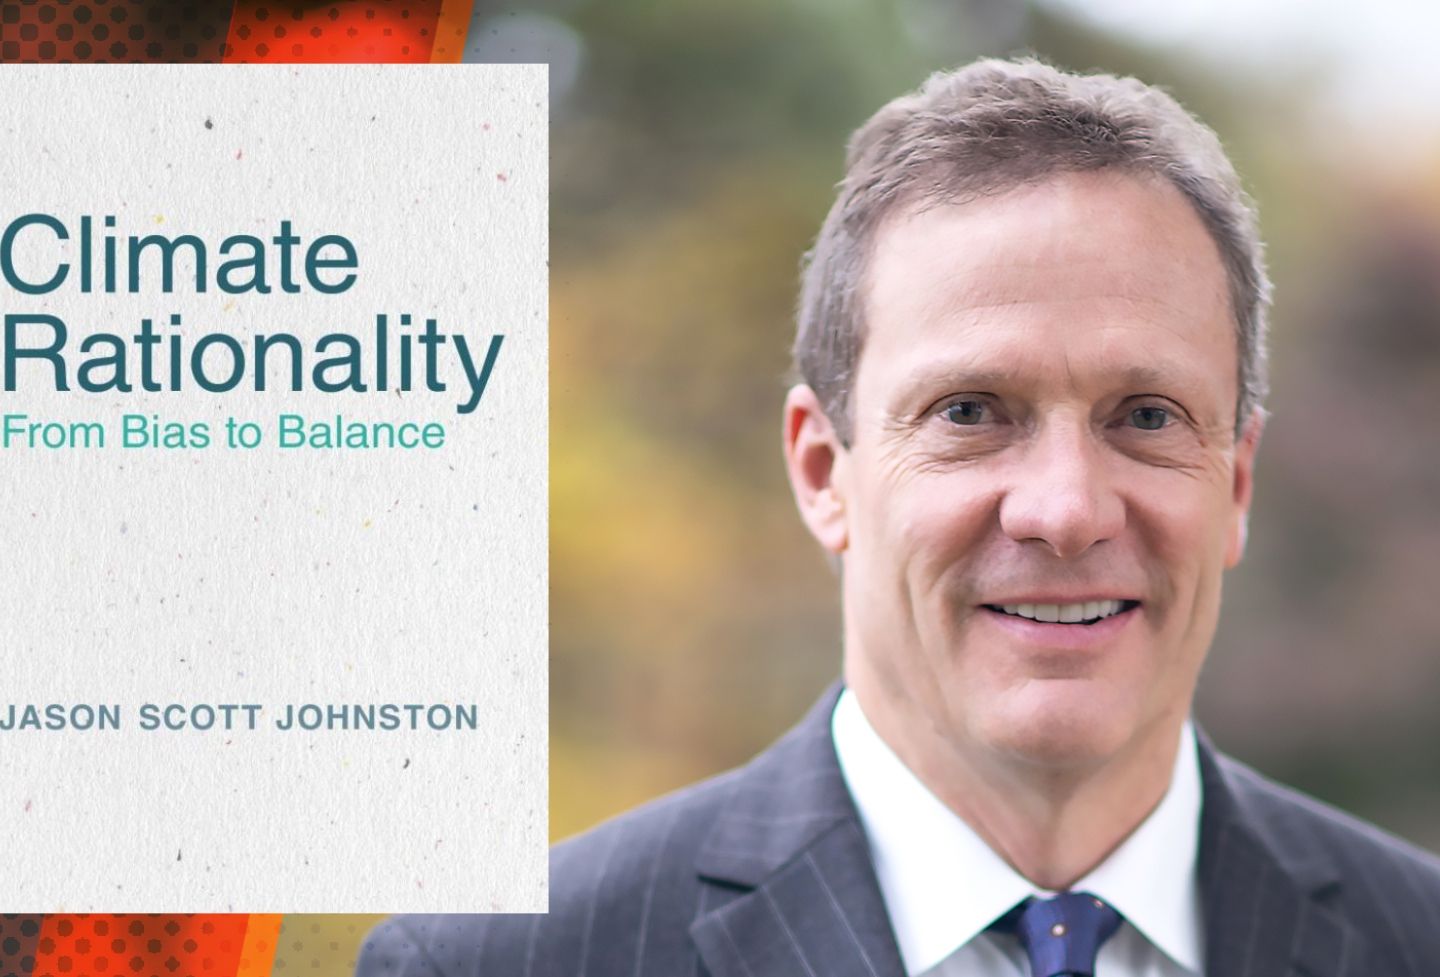 Jason Johnston and “Climate Rationality: From Bias to Balance”